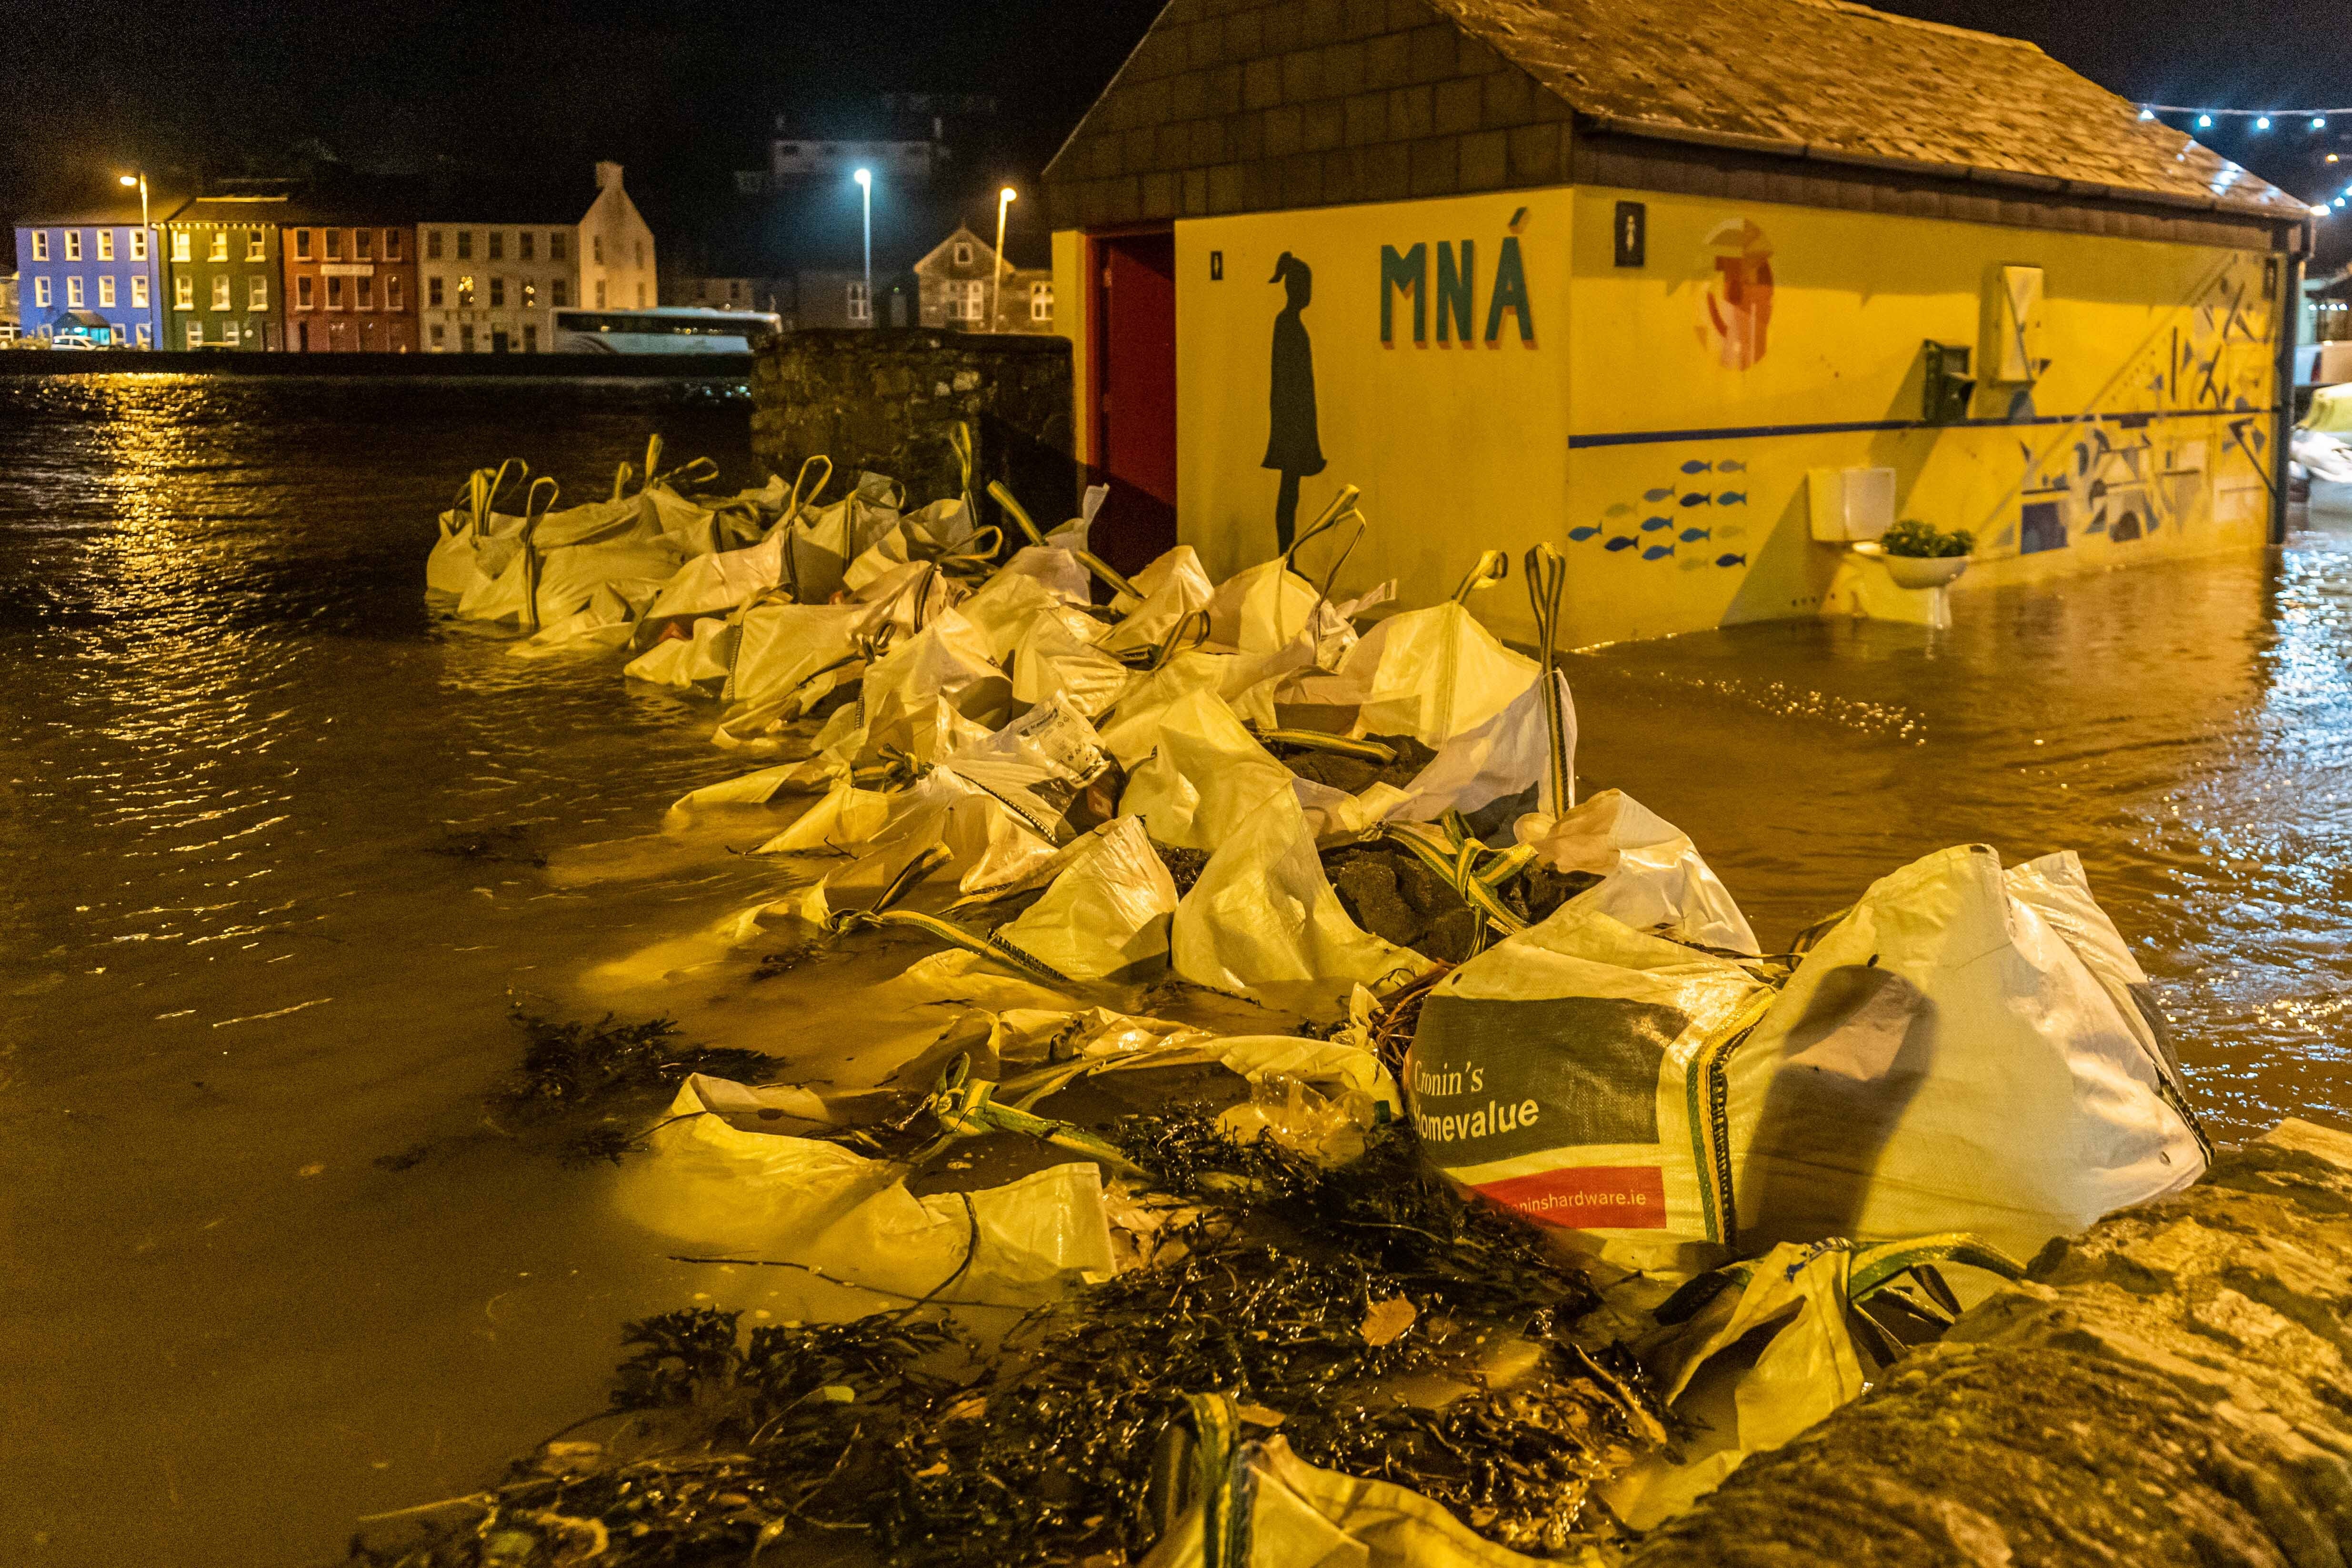 Sandbags piled up in the town of Bantry in County Cork which flooded after Storm Barra hit the UK and Ireland with disruptive winds, heavy rain and snow (PA)